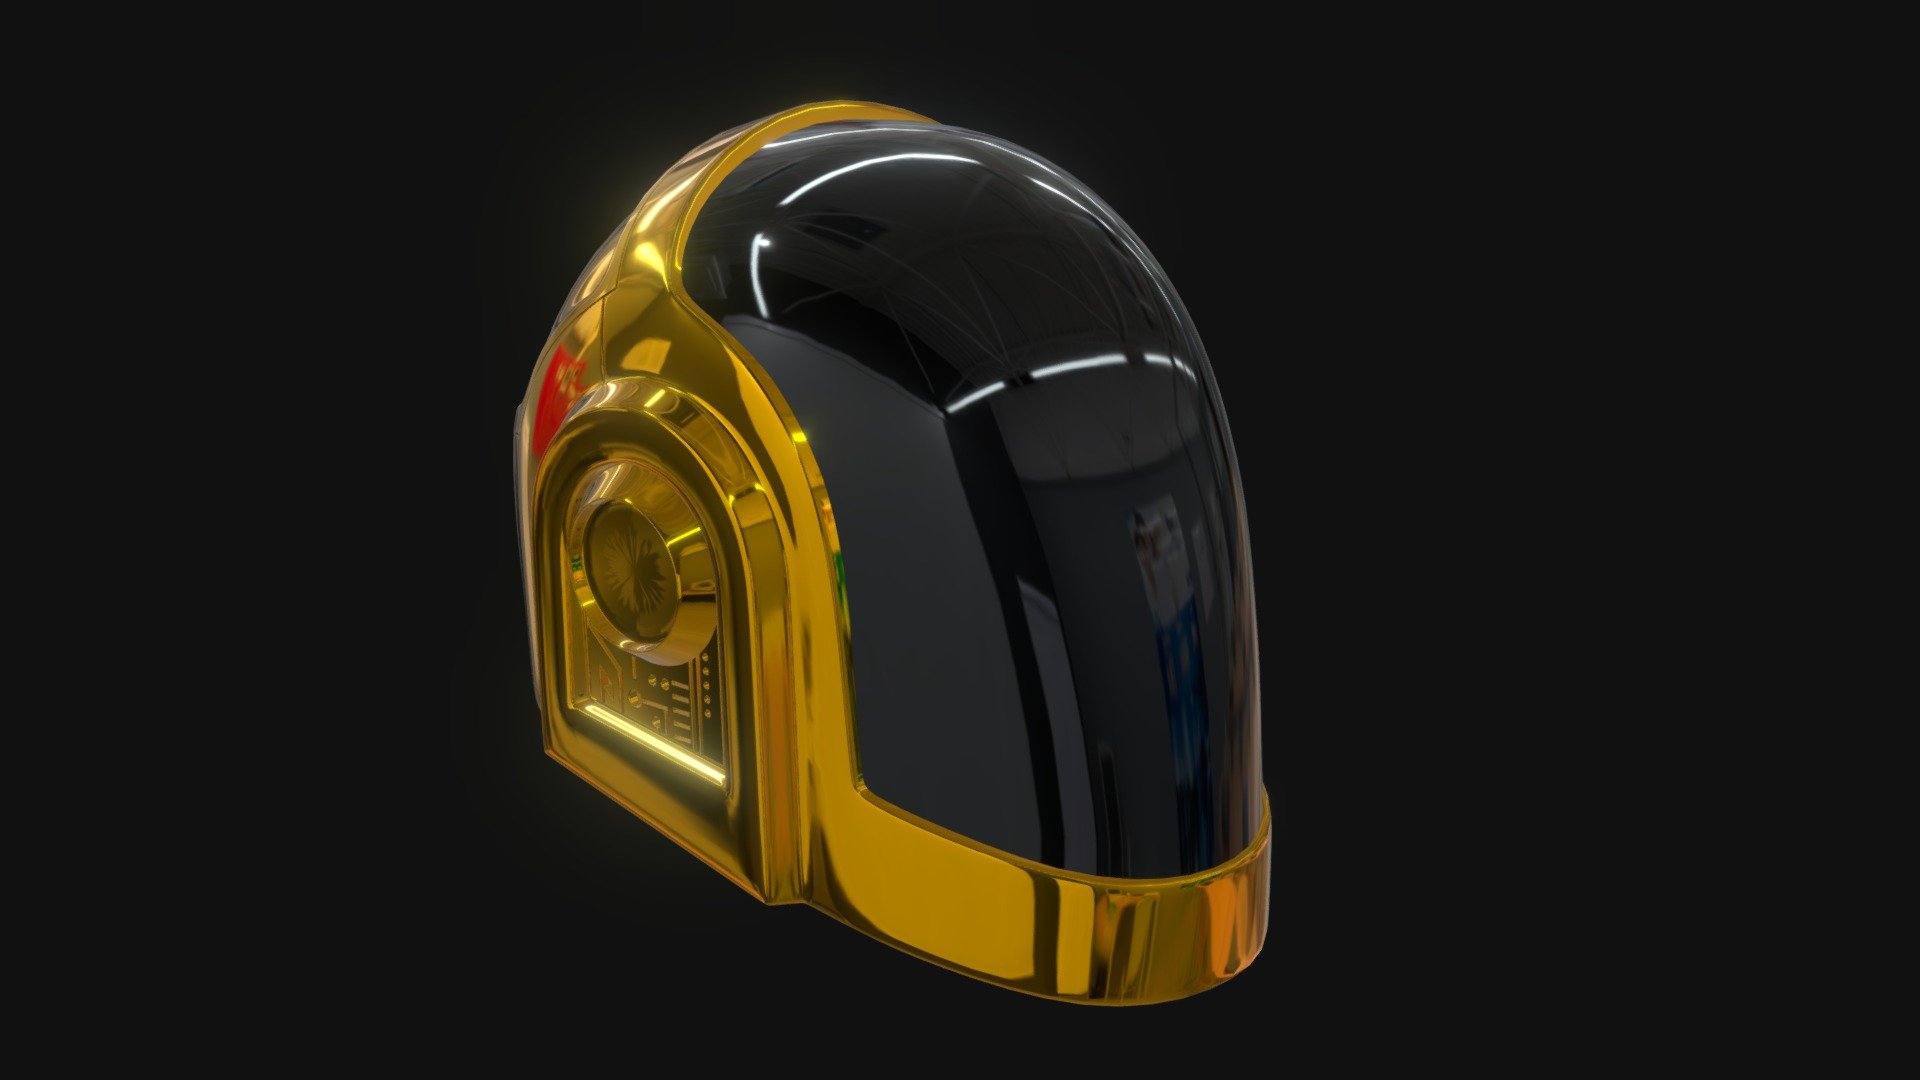 3D model of Guy-Manuel's Daft Punk helmet, made in Blender. Subdivision modifiers have not been applied, so if you download the Blend file it should be easier to work with. Importing directly should be fine if you don't care about modifying it though. Feel free to do whatever you want with this model. It's not album-cover accurate, but it's close enough if you ask me. If you're looking for Thomas's helmet, I have that one too 3d model